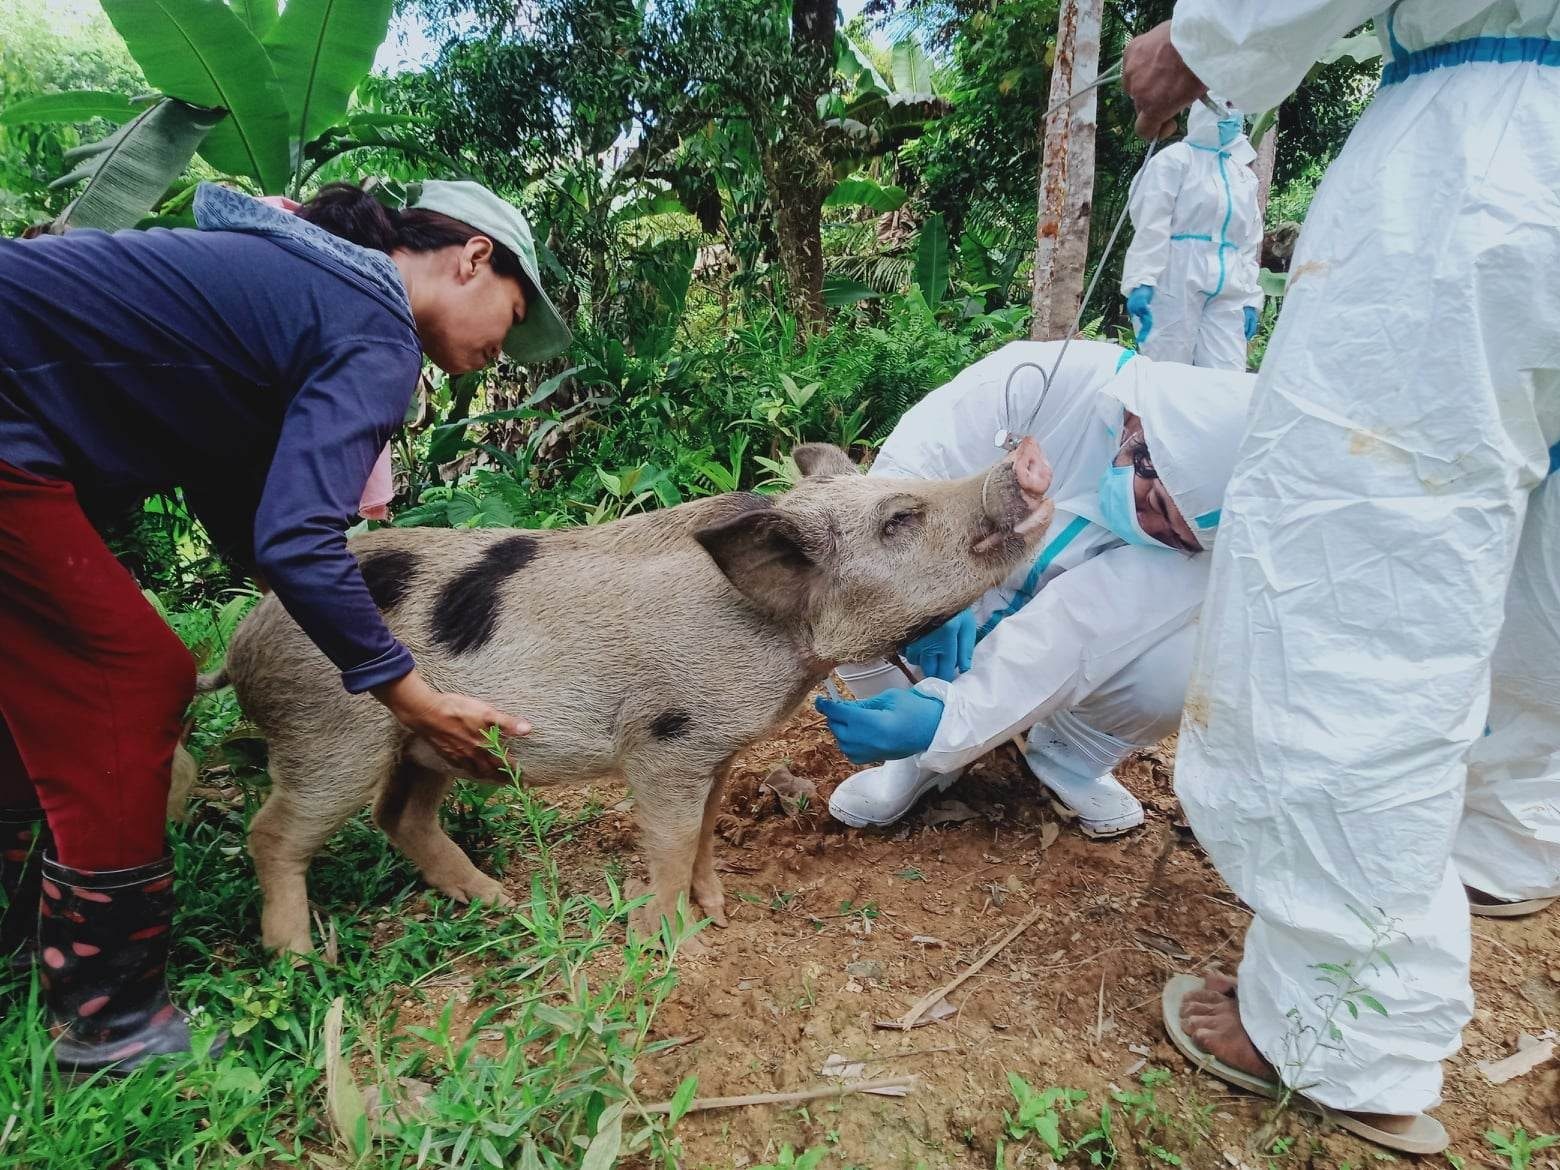 Aklan declares state of calamity over African swine fever outbreak